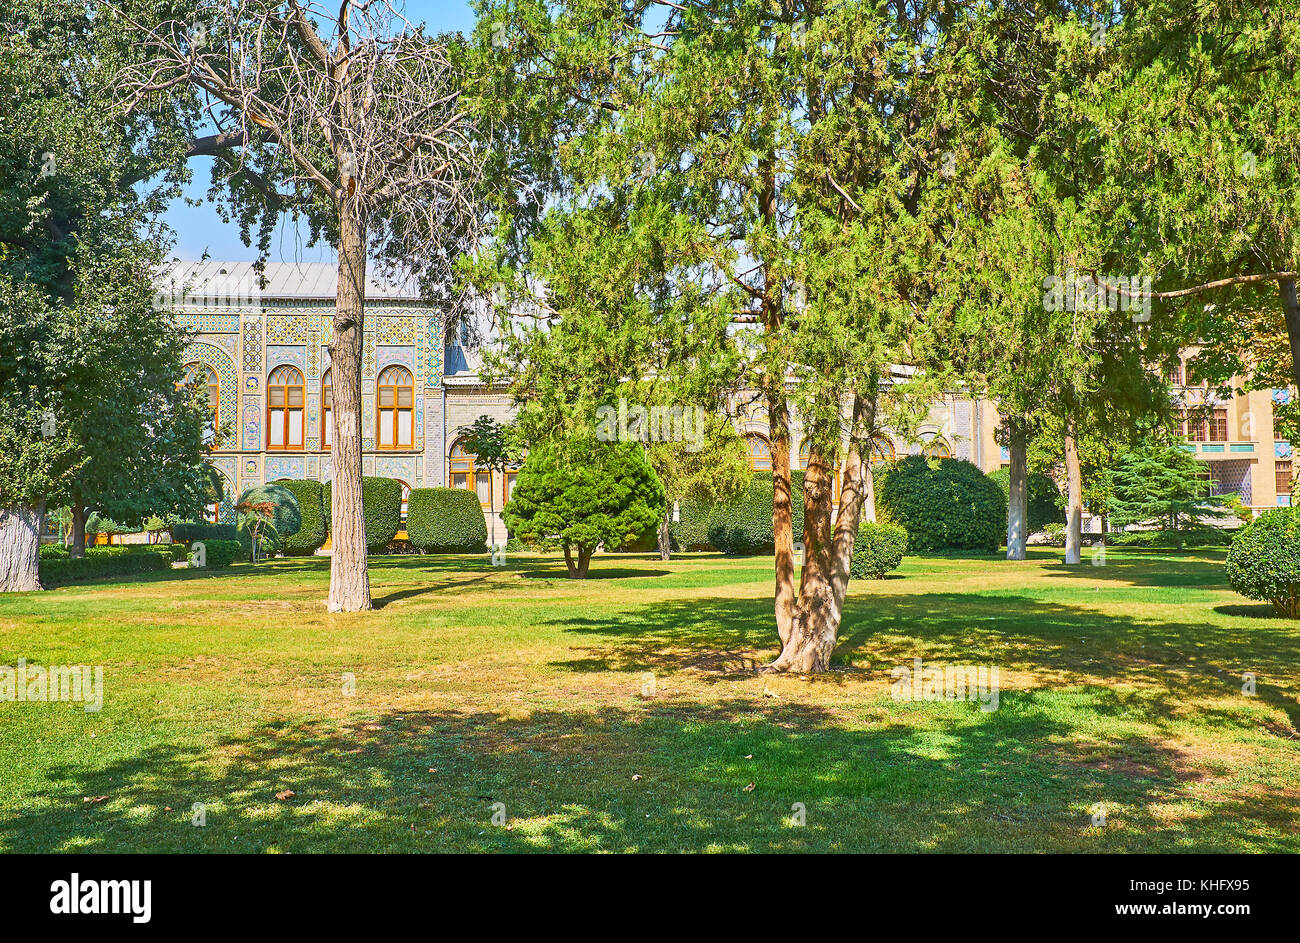 The Golestan garden is scenic and peaceful place in heart of large city, Tehran, Iran. Stock Photo